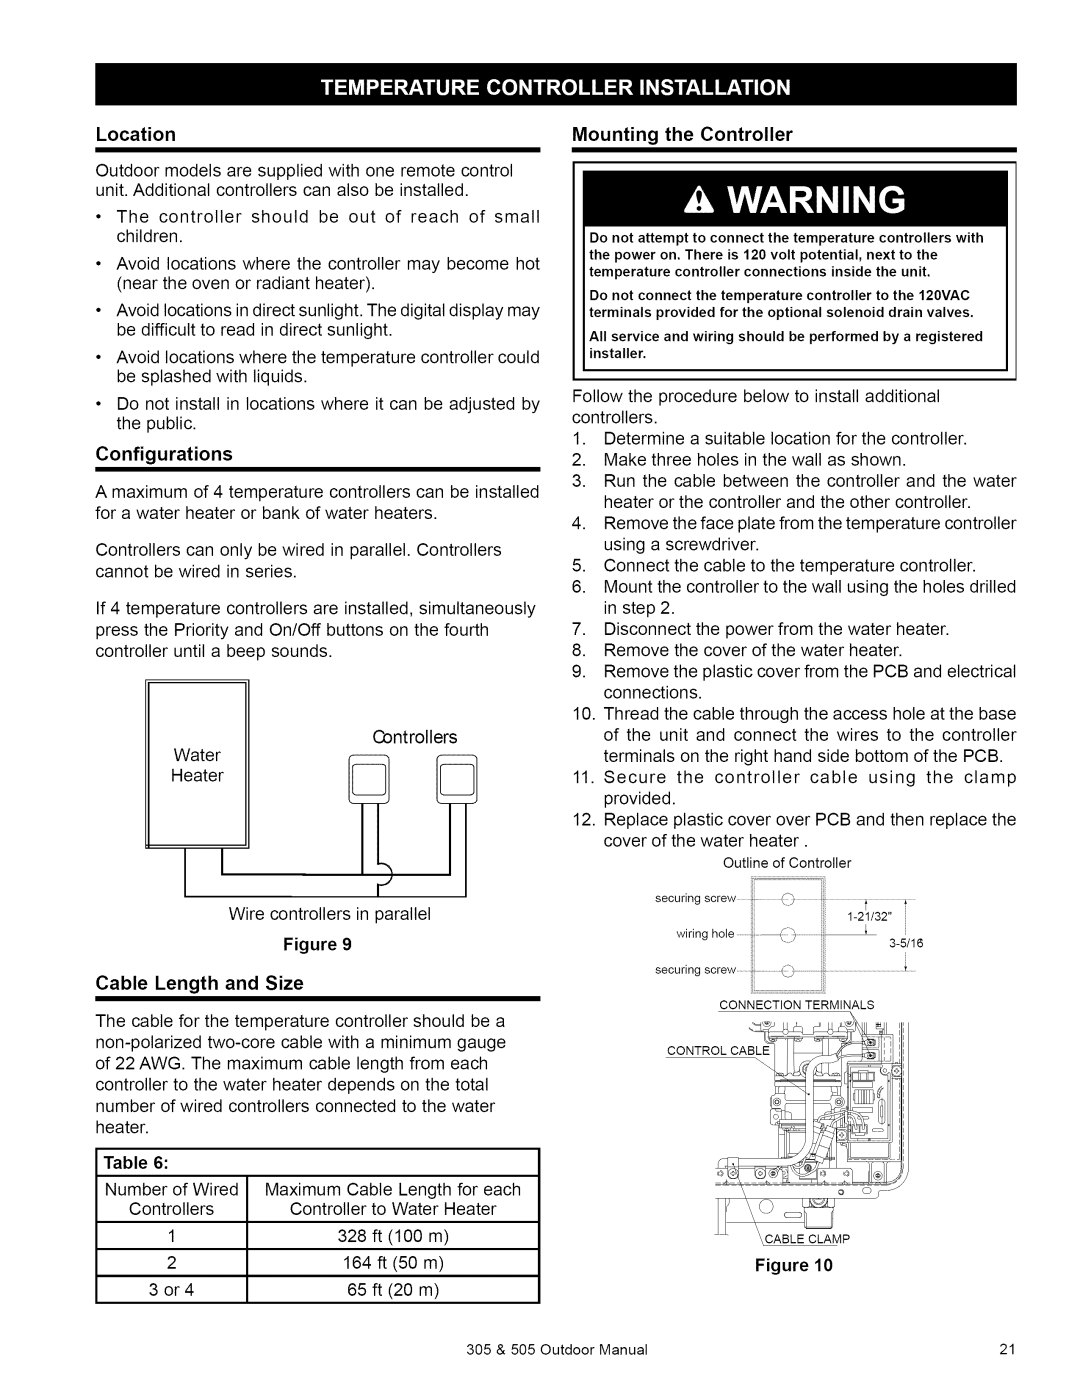 Kenmore 305, 505 owner manual 1-21/3zi, Location, Figure Cable Length and Size, Mounting the Controller 